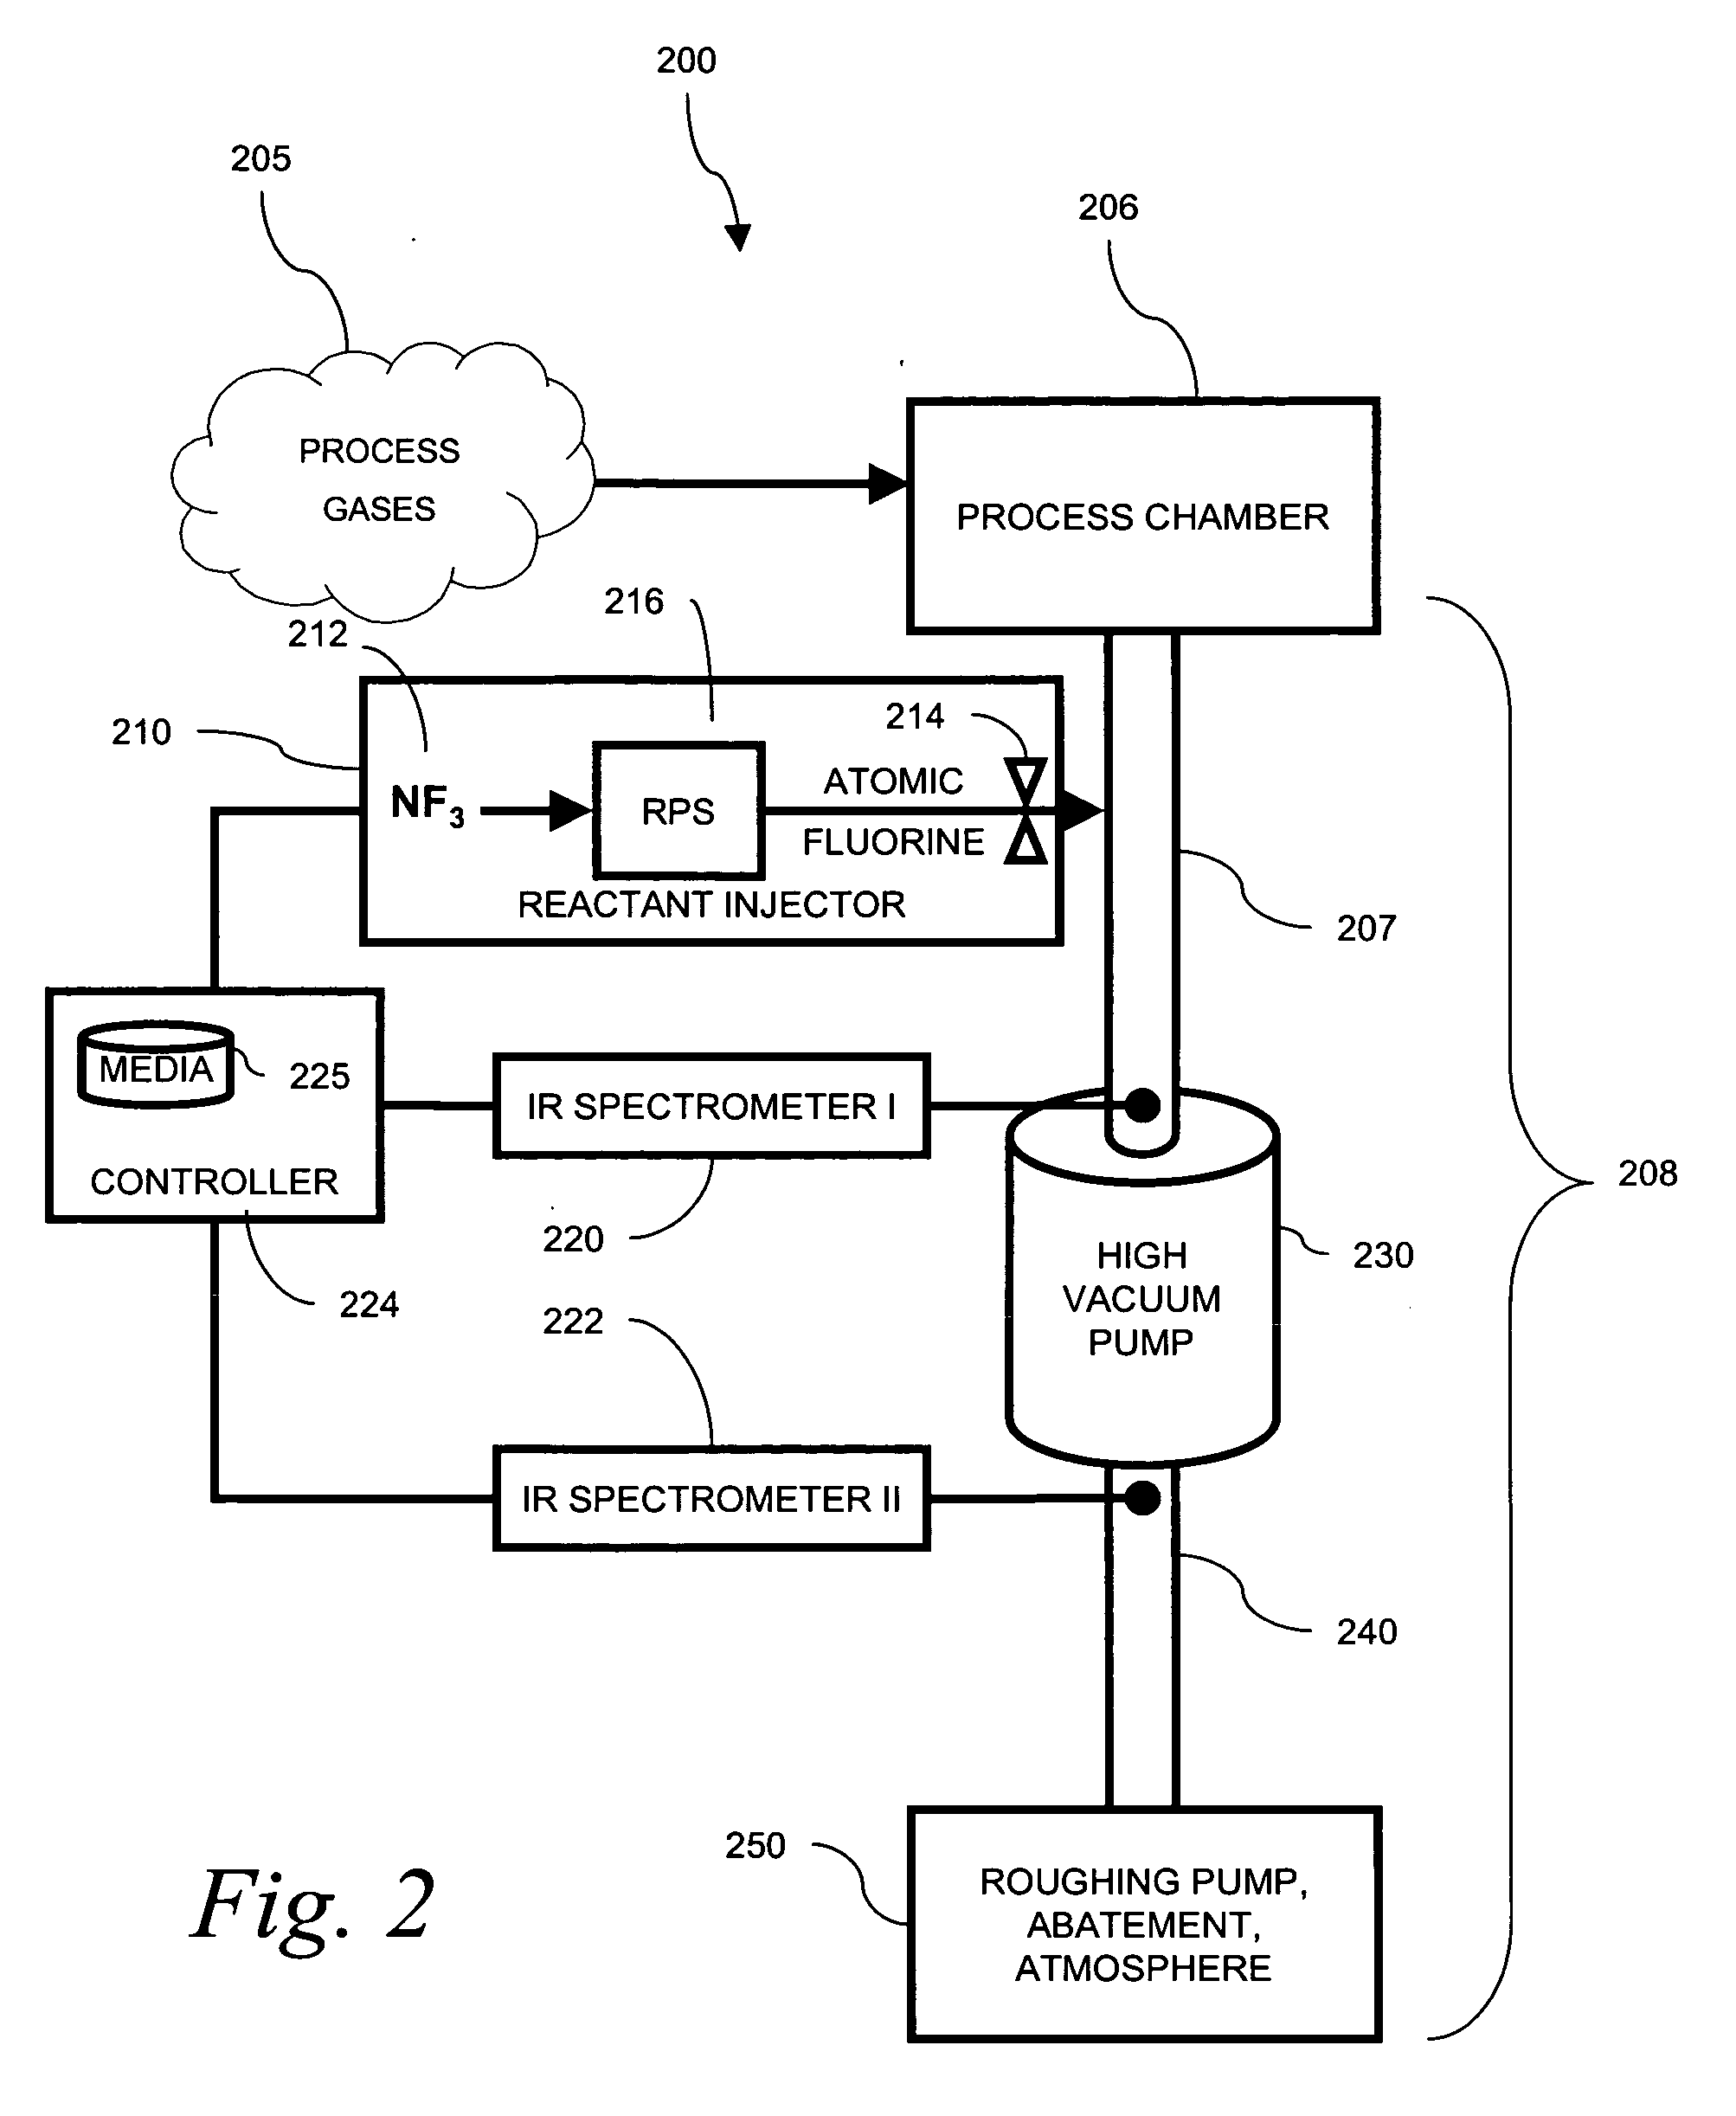 Use of spectroscopic techniques to monitor and control reactant gas input into a pre-pump reactive gas injection system